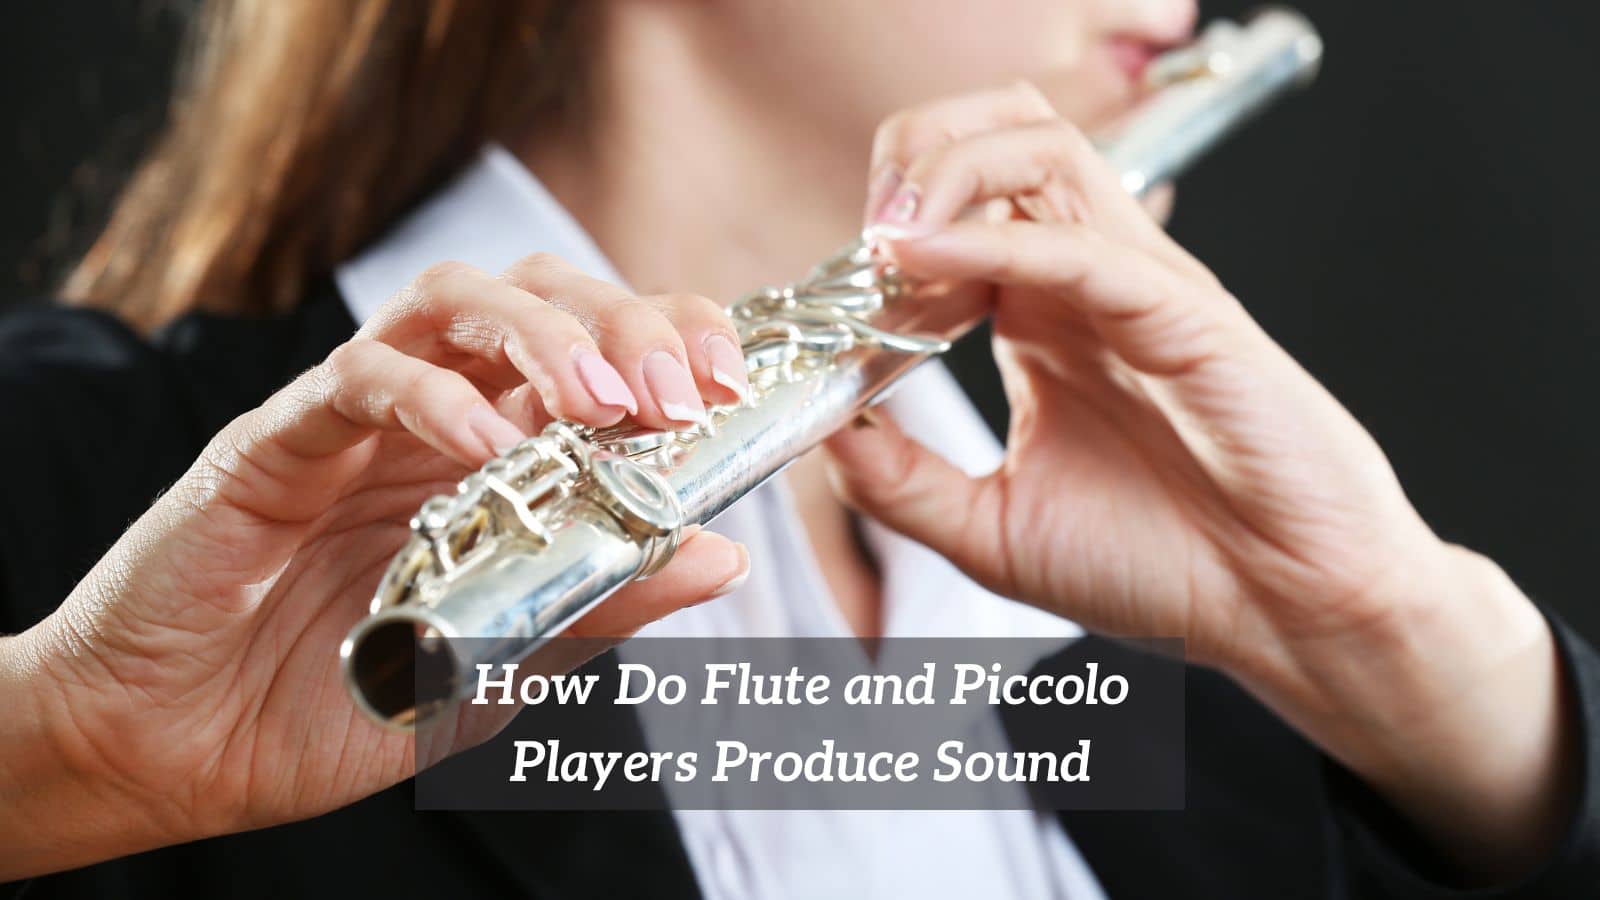 How Do Flute and Piccolo Players Produce Sound